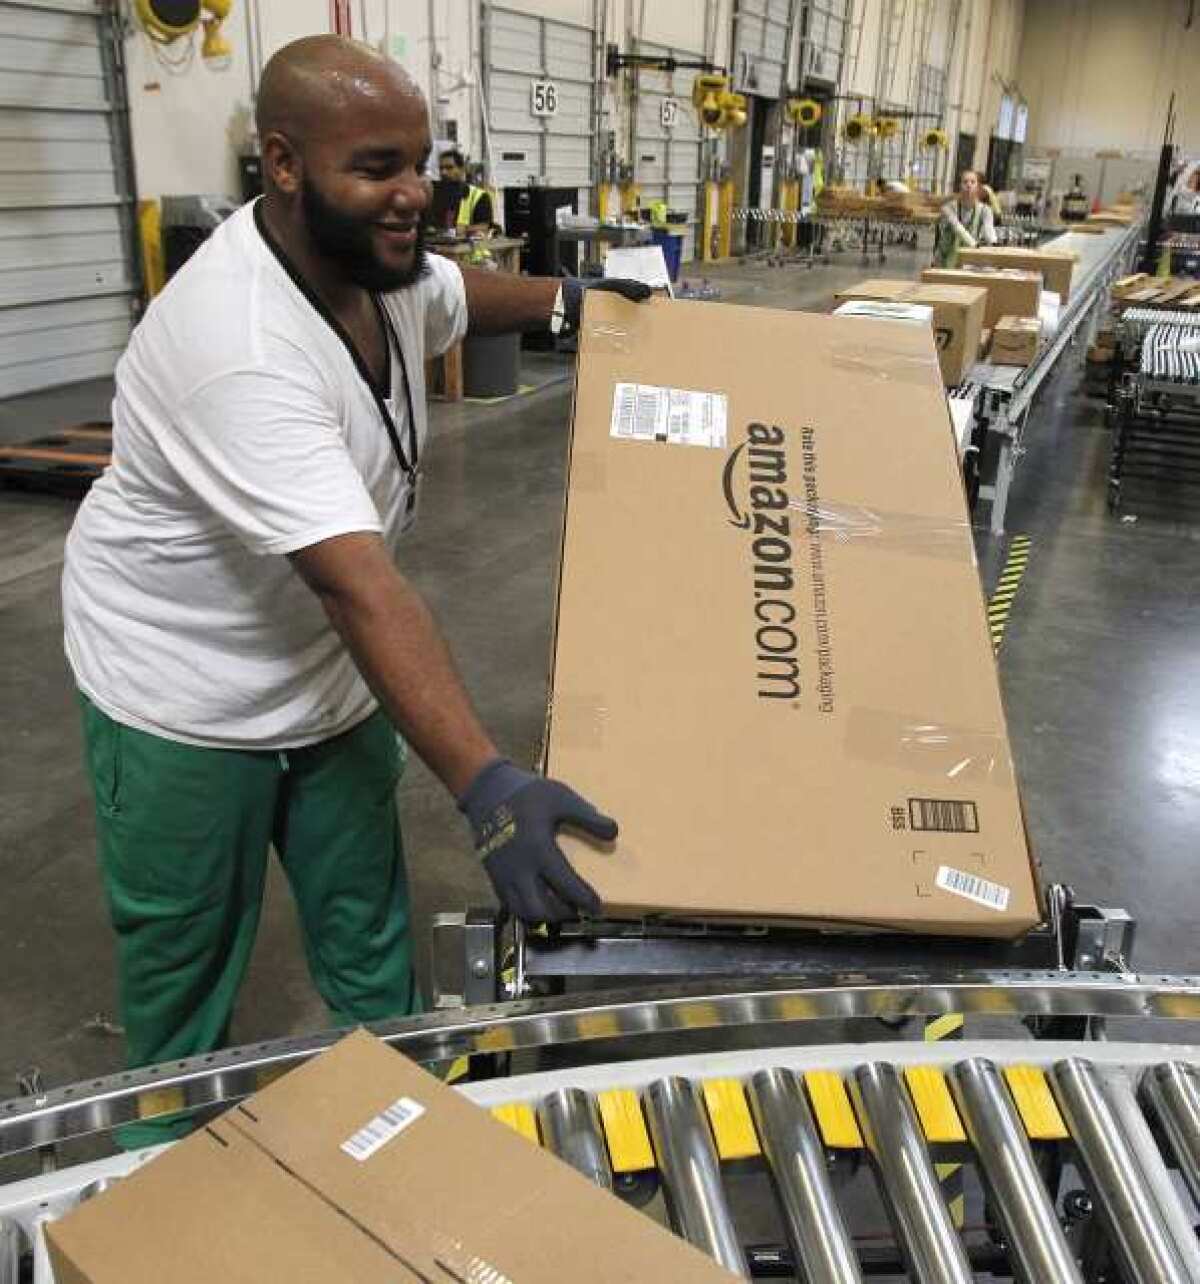 Leacroft Green carries a package to the correct shipping area at an Amazon.com fulfillment center in Goodyear, Ariz. Amazon has just opened two similar facilities in Northern California.